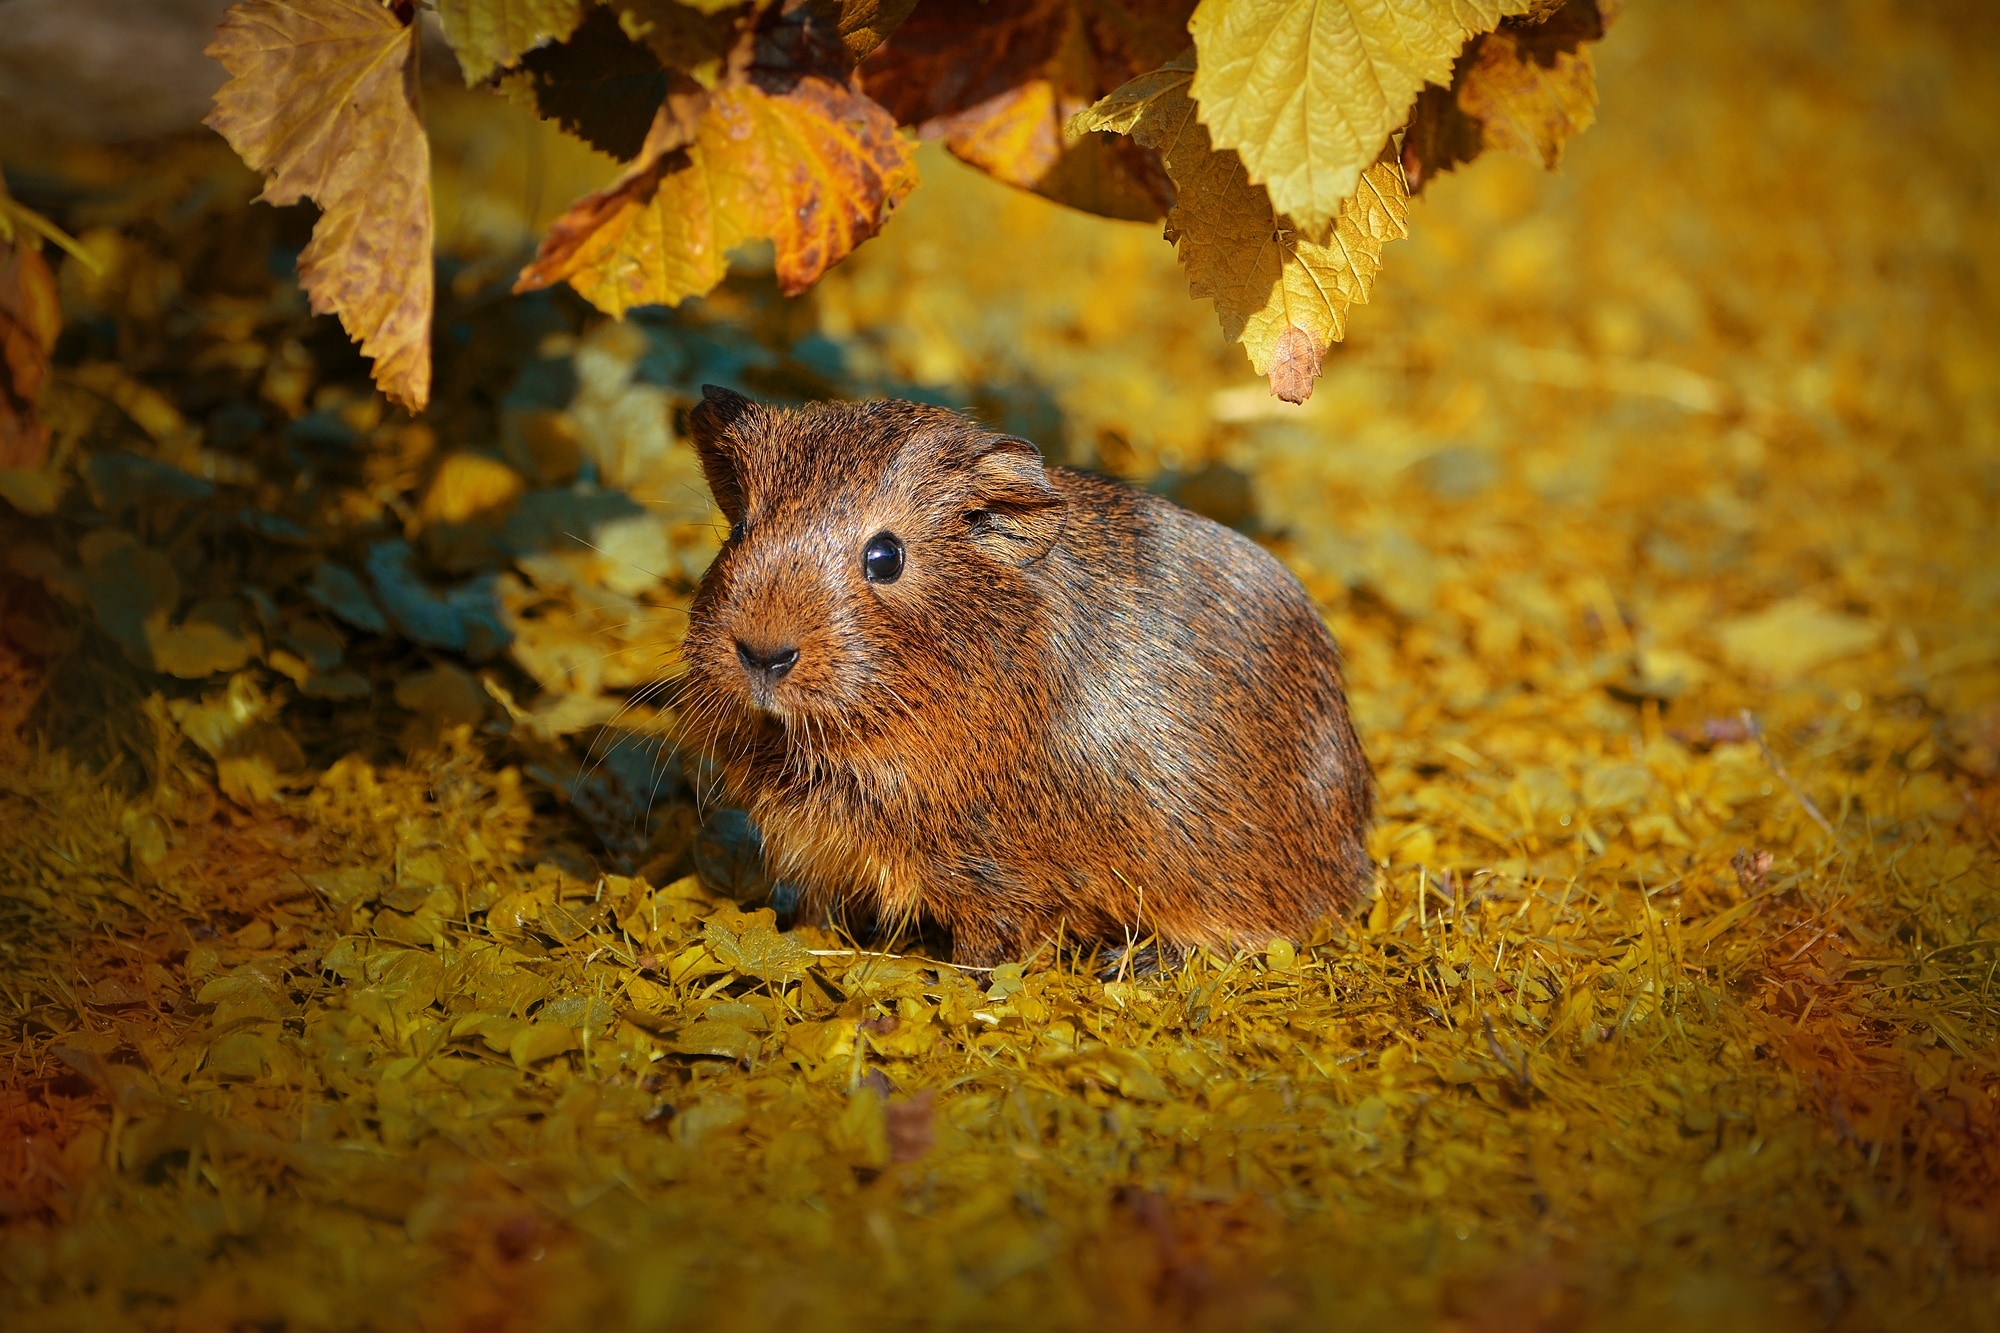 Guinea Pig, Young Animal, one animal, autumn